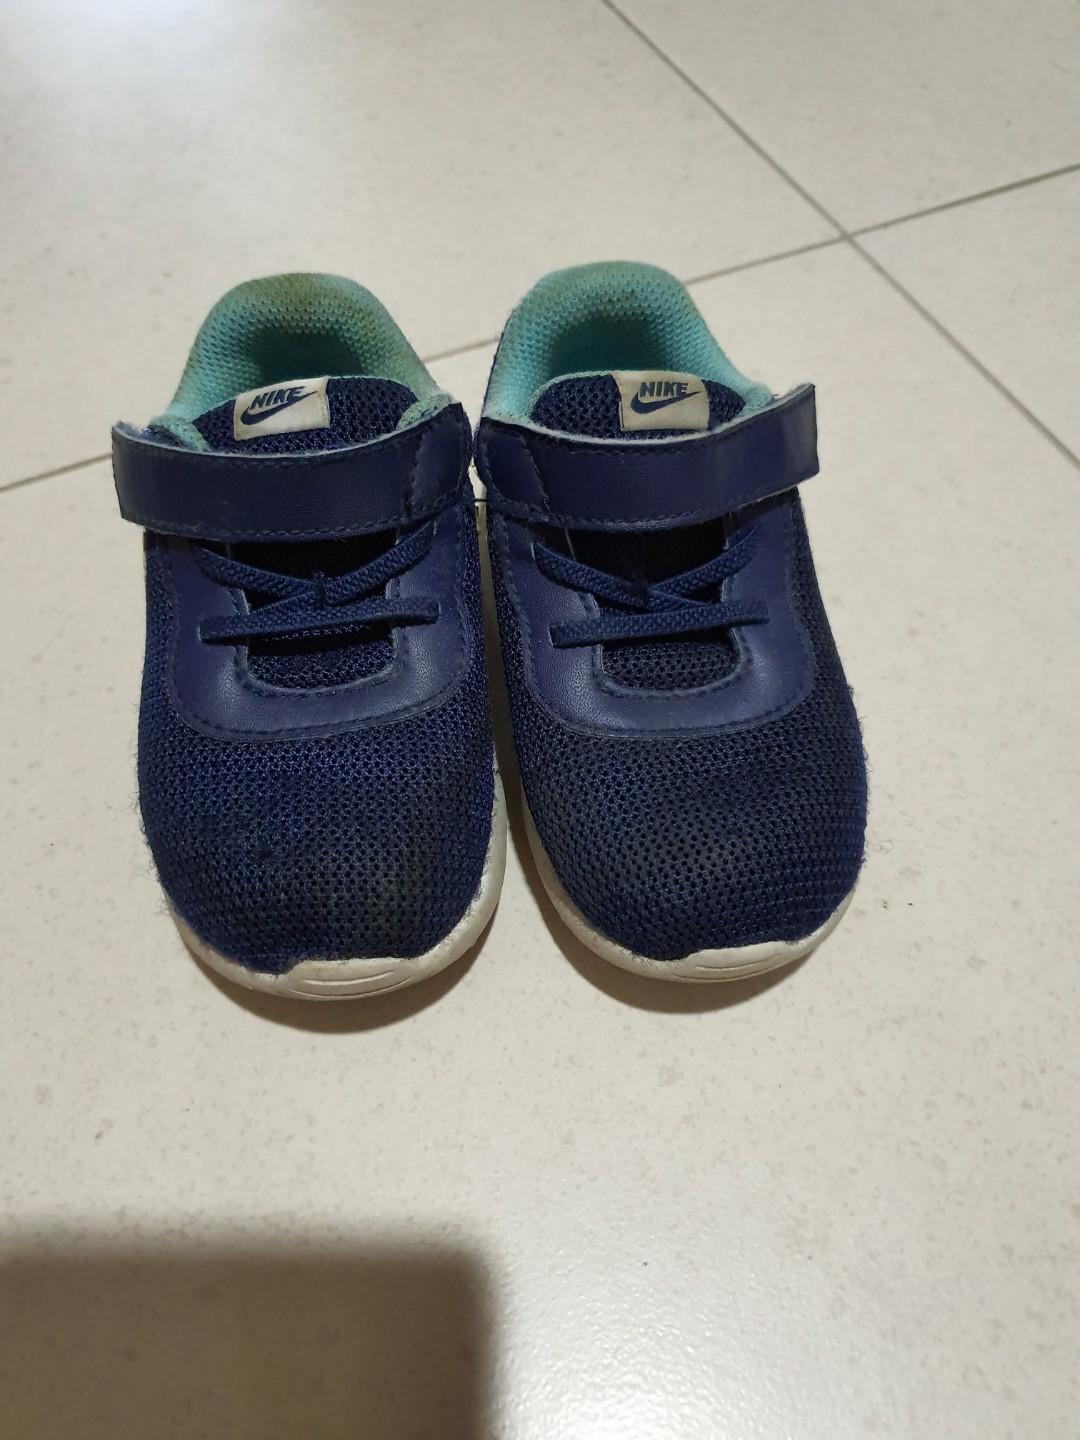 nike toddler size 3 shoes